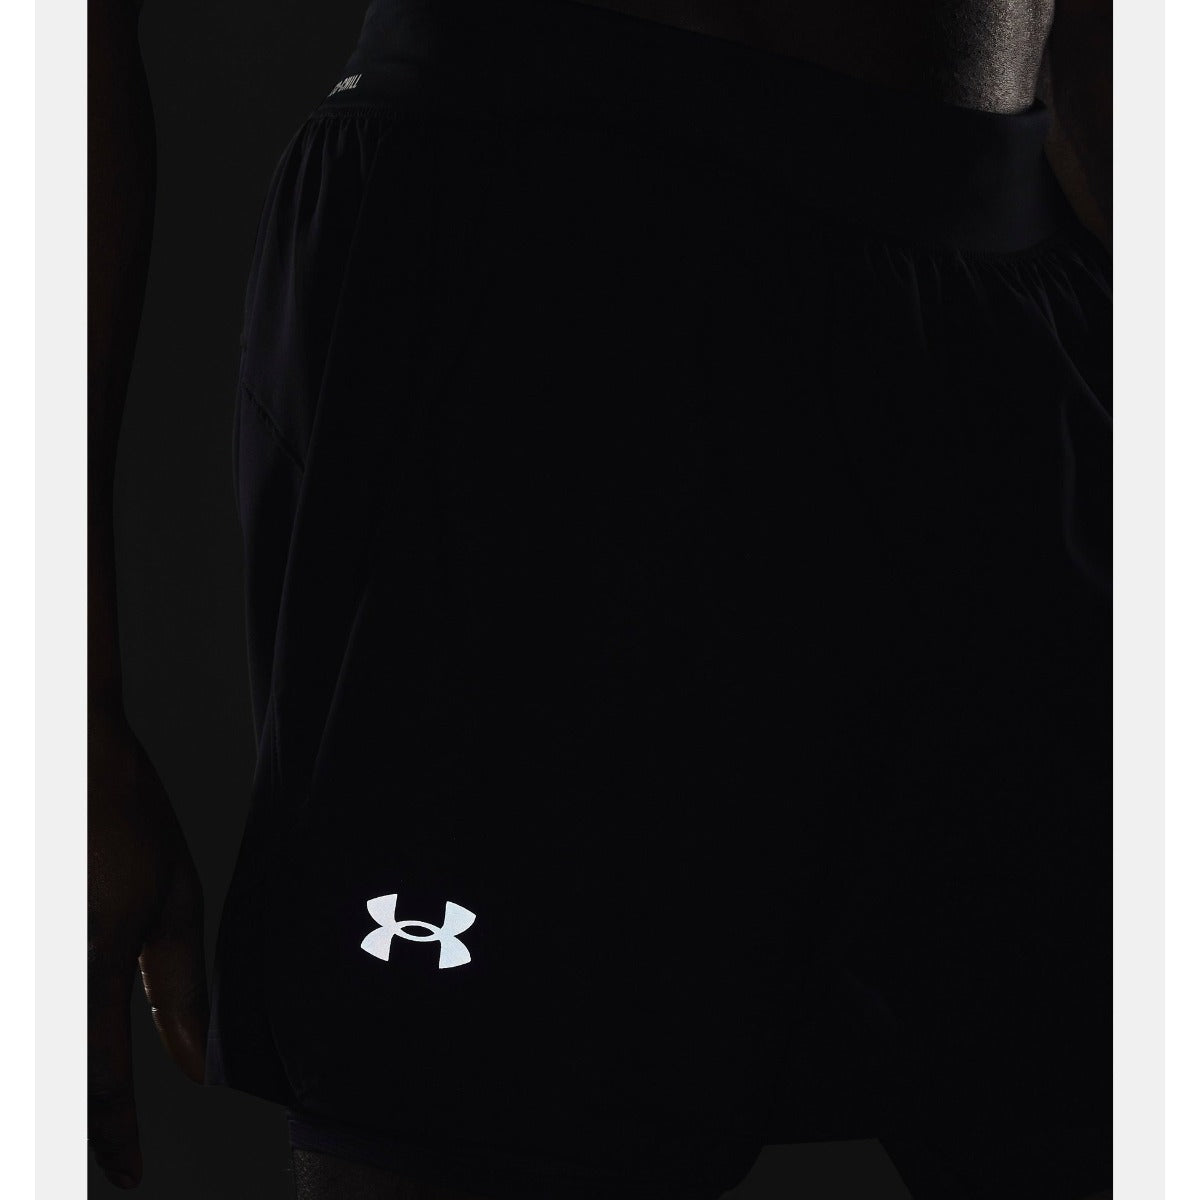 Under Armour Iso Run Chill 2 in 1 Shorts Men’s (Black 001)